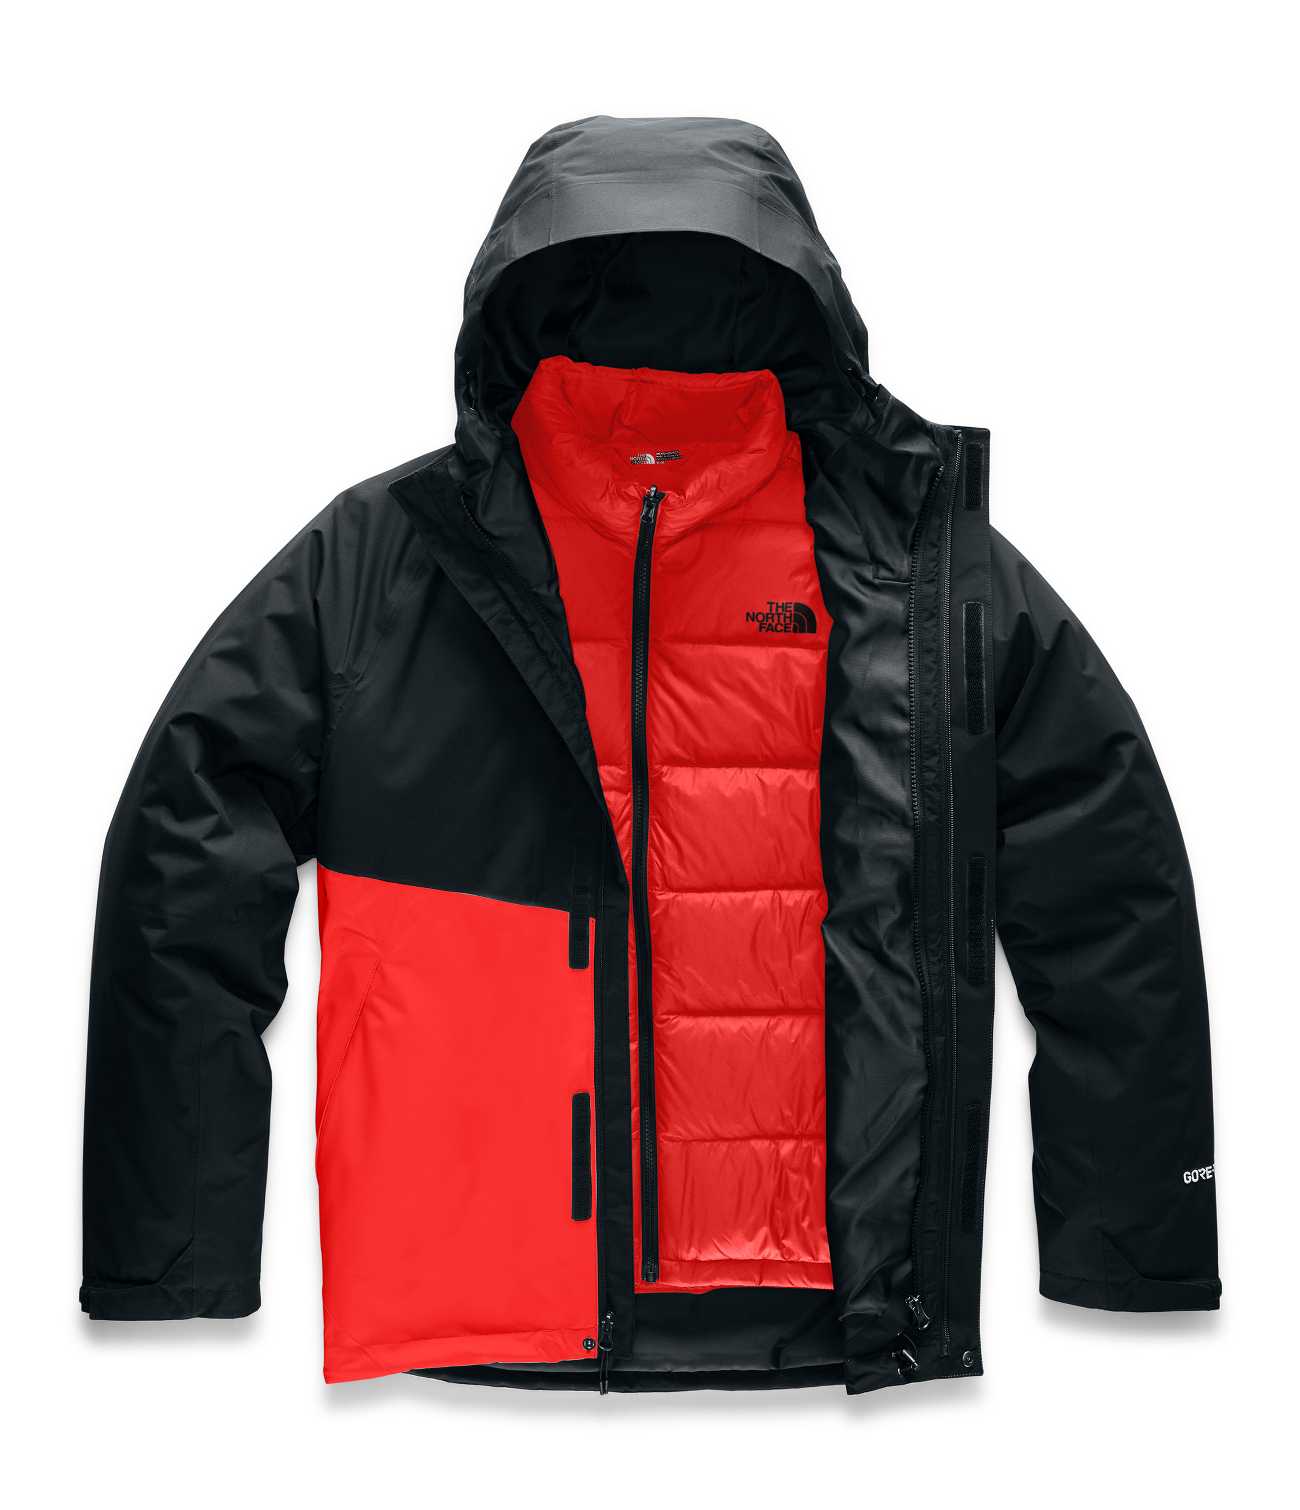 The North Face Renewed - MEN'S MOUNTAIN LIGHT TRICLIMATE® JACKET